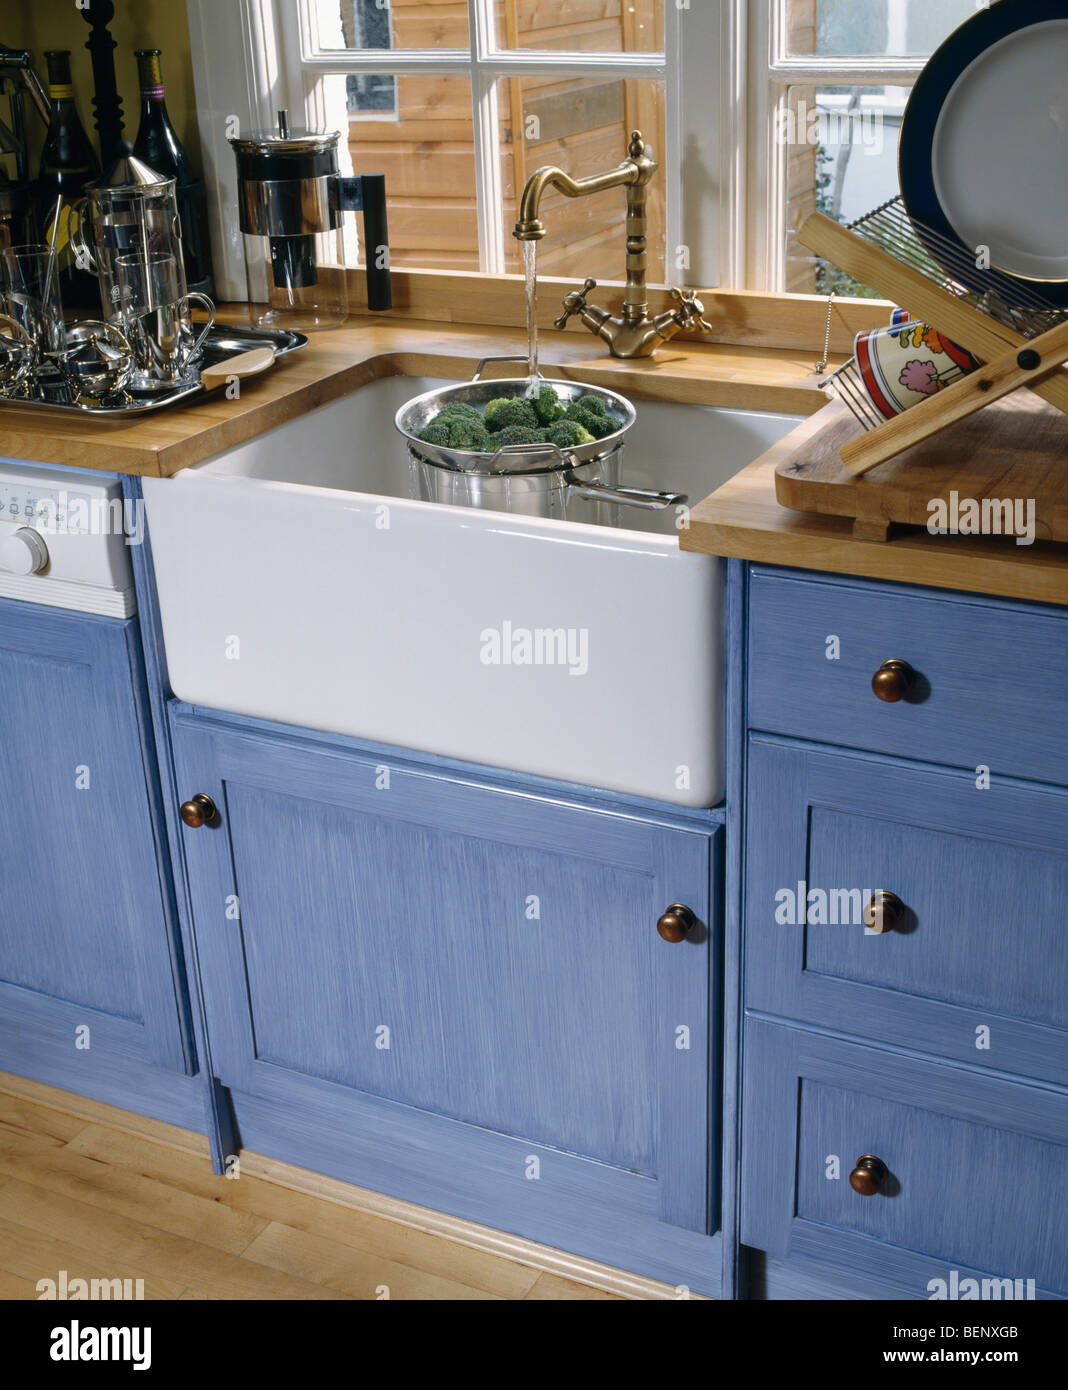 Close-up of Belfast sink below window in kitchen with fitted blue units Stock Photo